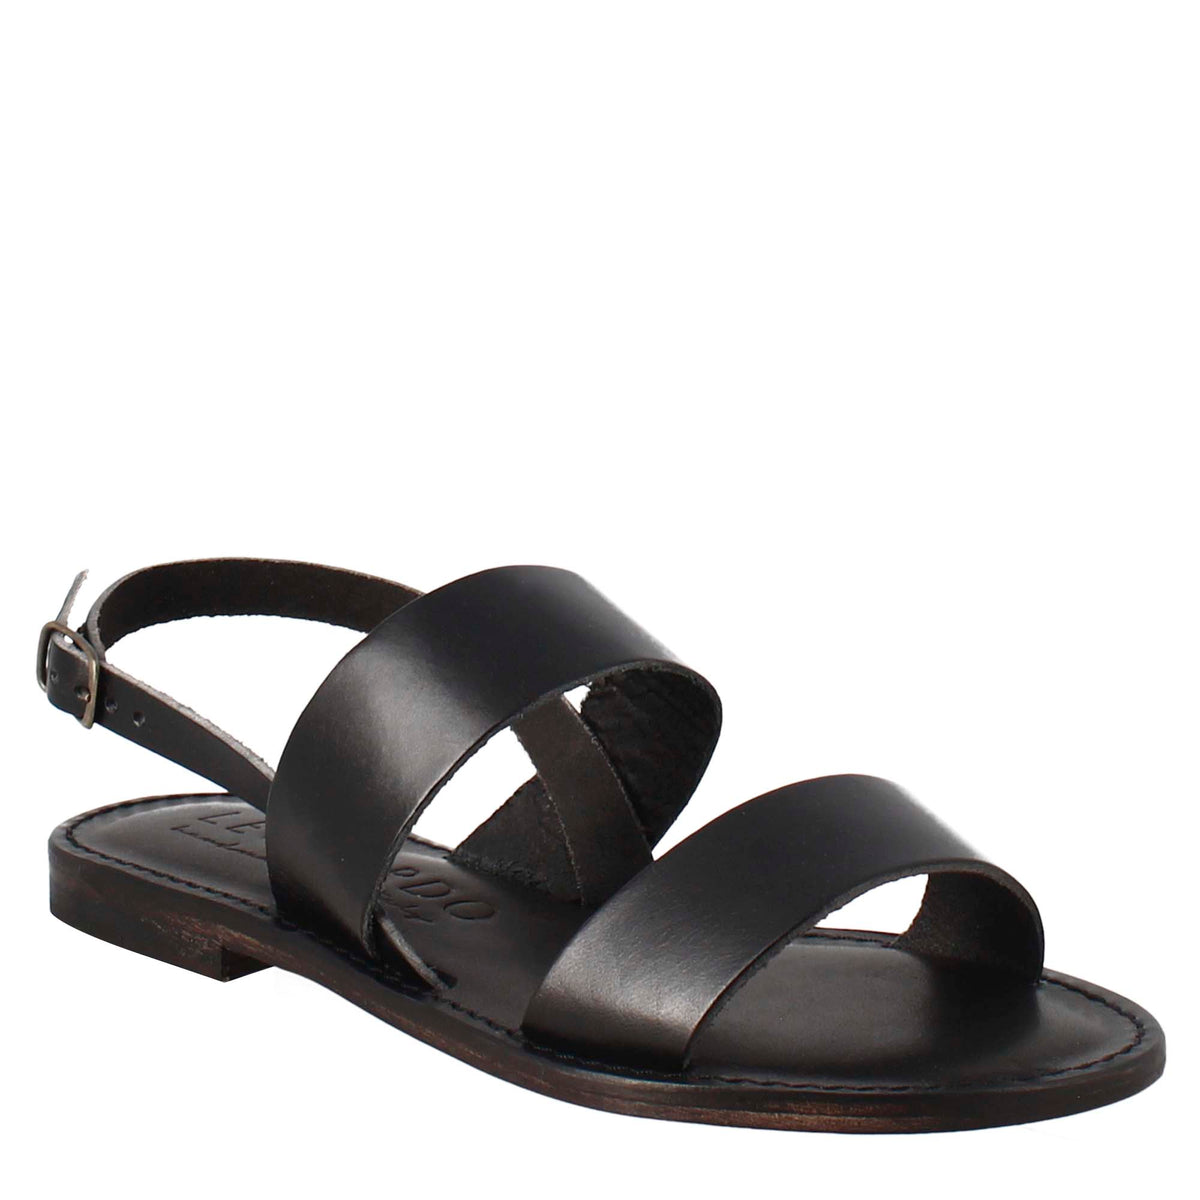 Euforia women's sandals in ancient Roman style in black leather